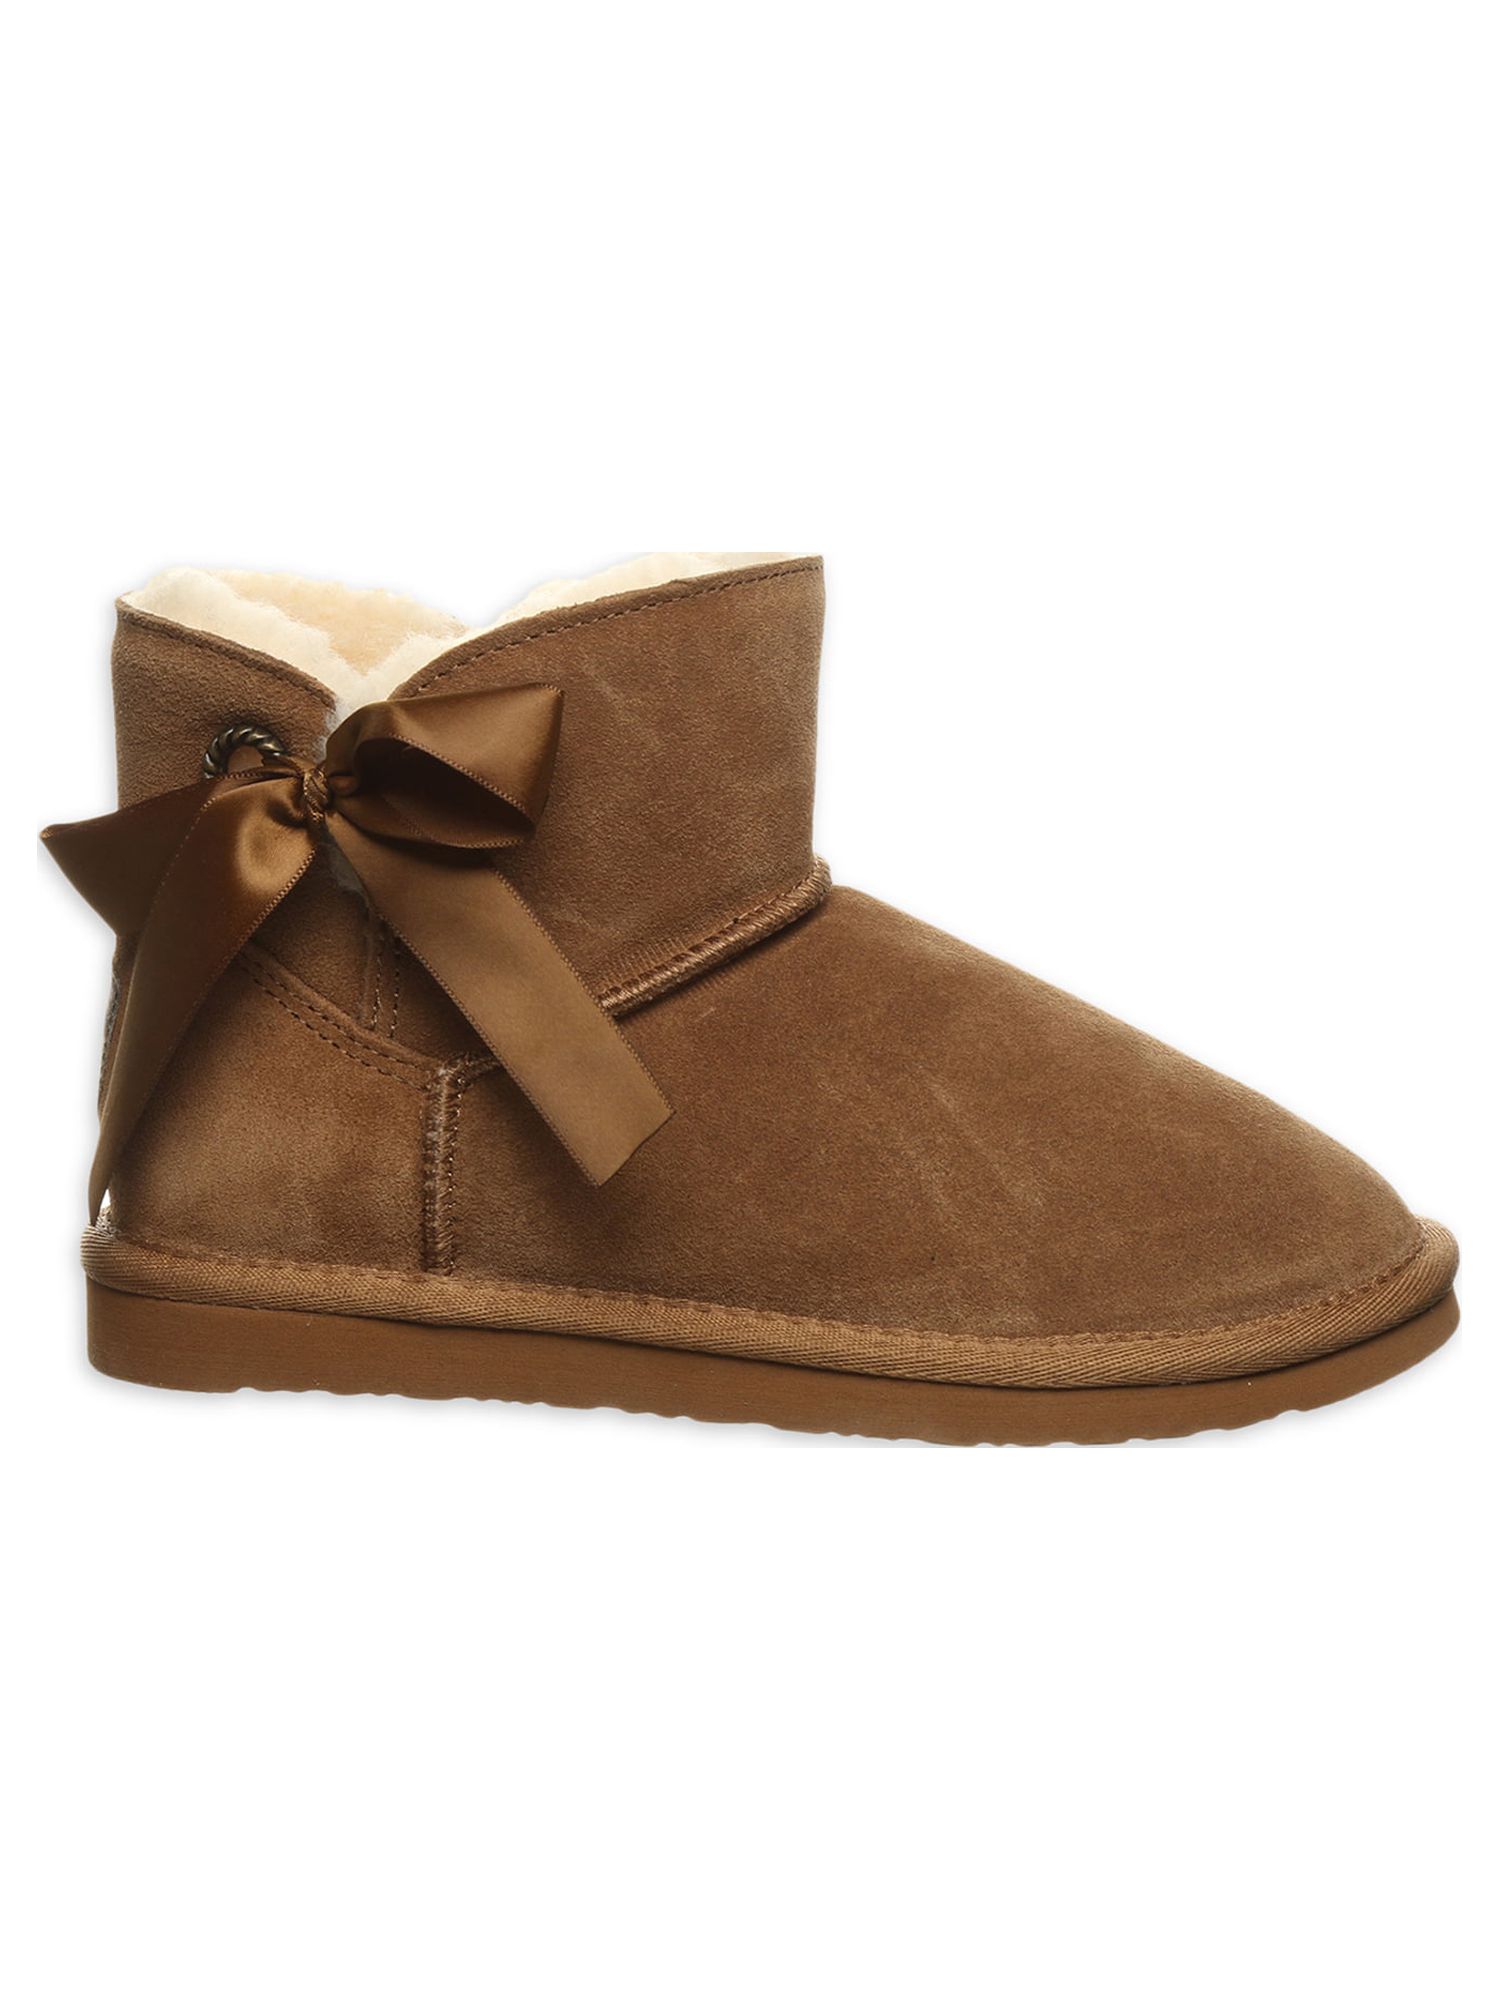 Pawz by Bearpaw Womens Journey Faux Fur Lined Suede Ankle Bow Bootie - image 4 of 5